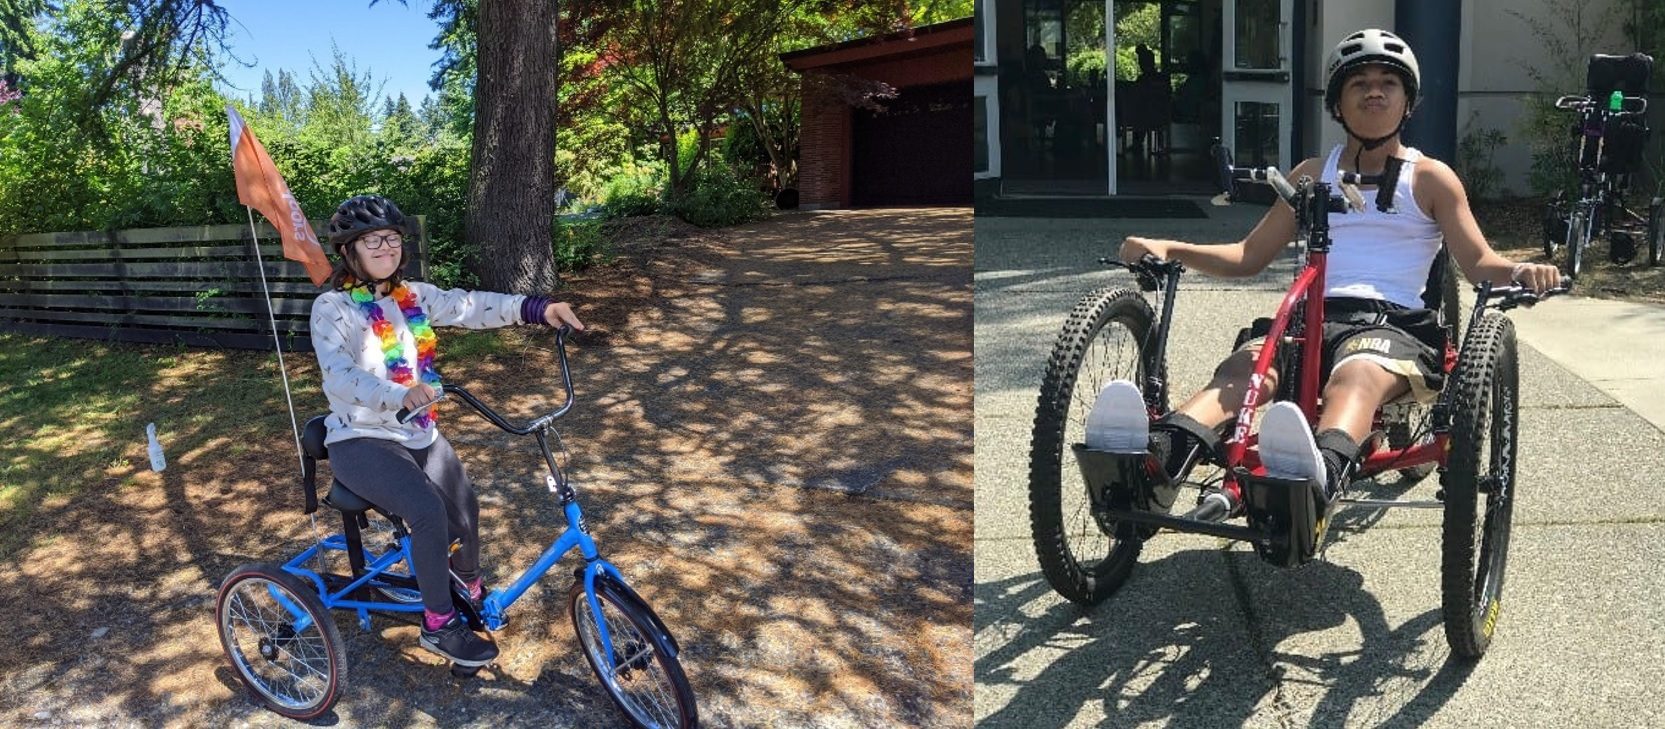 Two photos of people riding adaptive cycles outdoors. The person on the left is riding in front of several large trees and a fence. The person on the right is riding on a cement walkway.